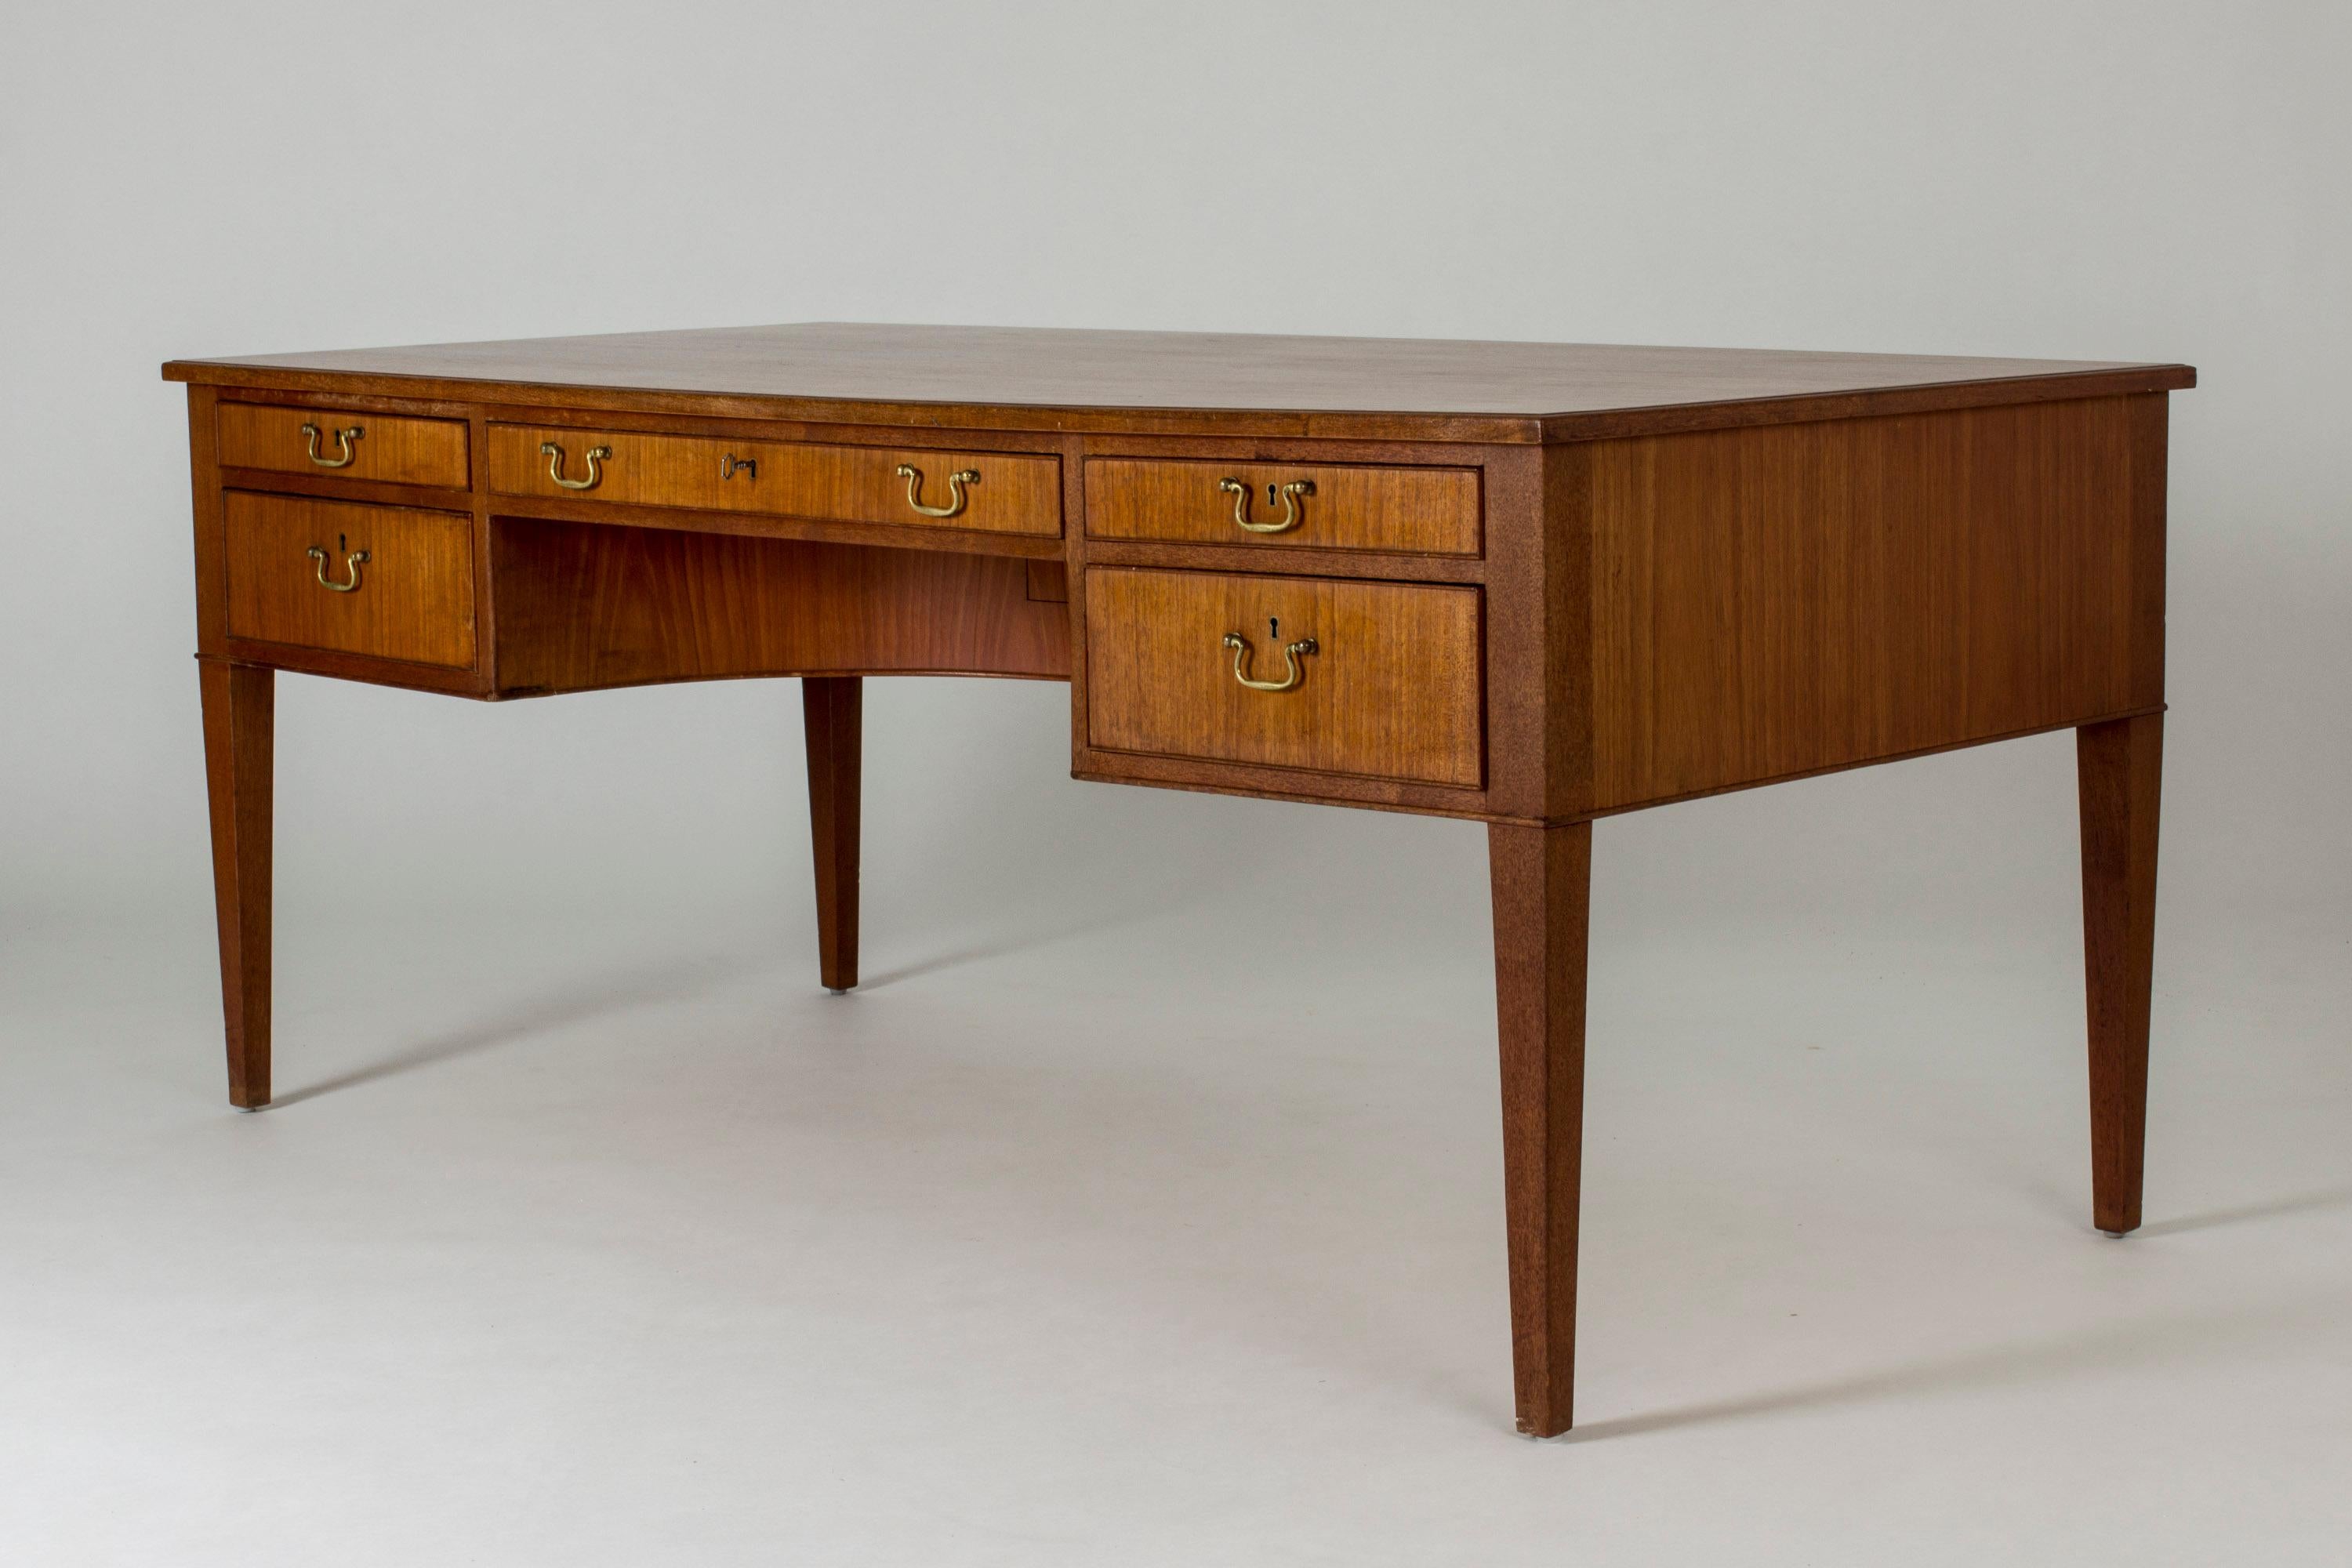 Elegant, spacious teak desk with brass handles by Frits Henningsen. The leg space is formed as an arch and in the deepest part, a secret compartment is hidden. It opens when the middle drawer is pulled out. Very nice attention to detail.